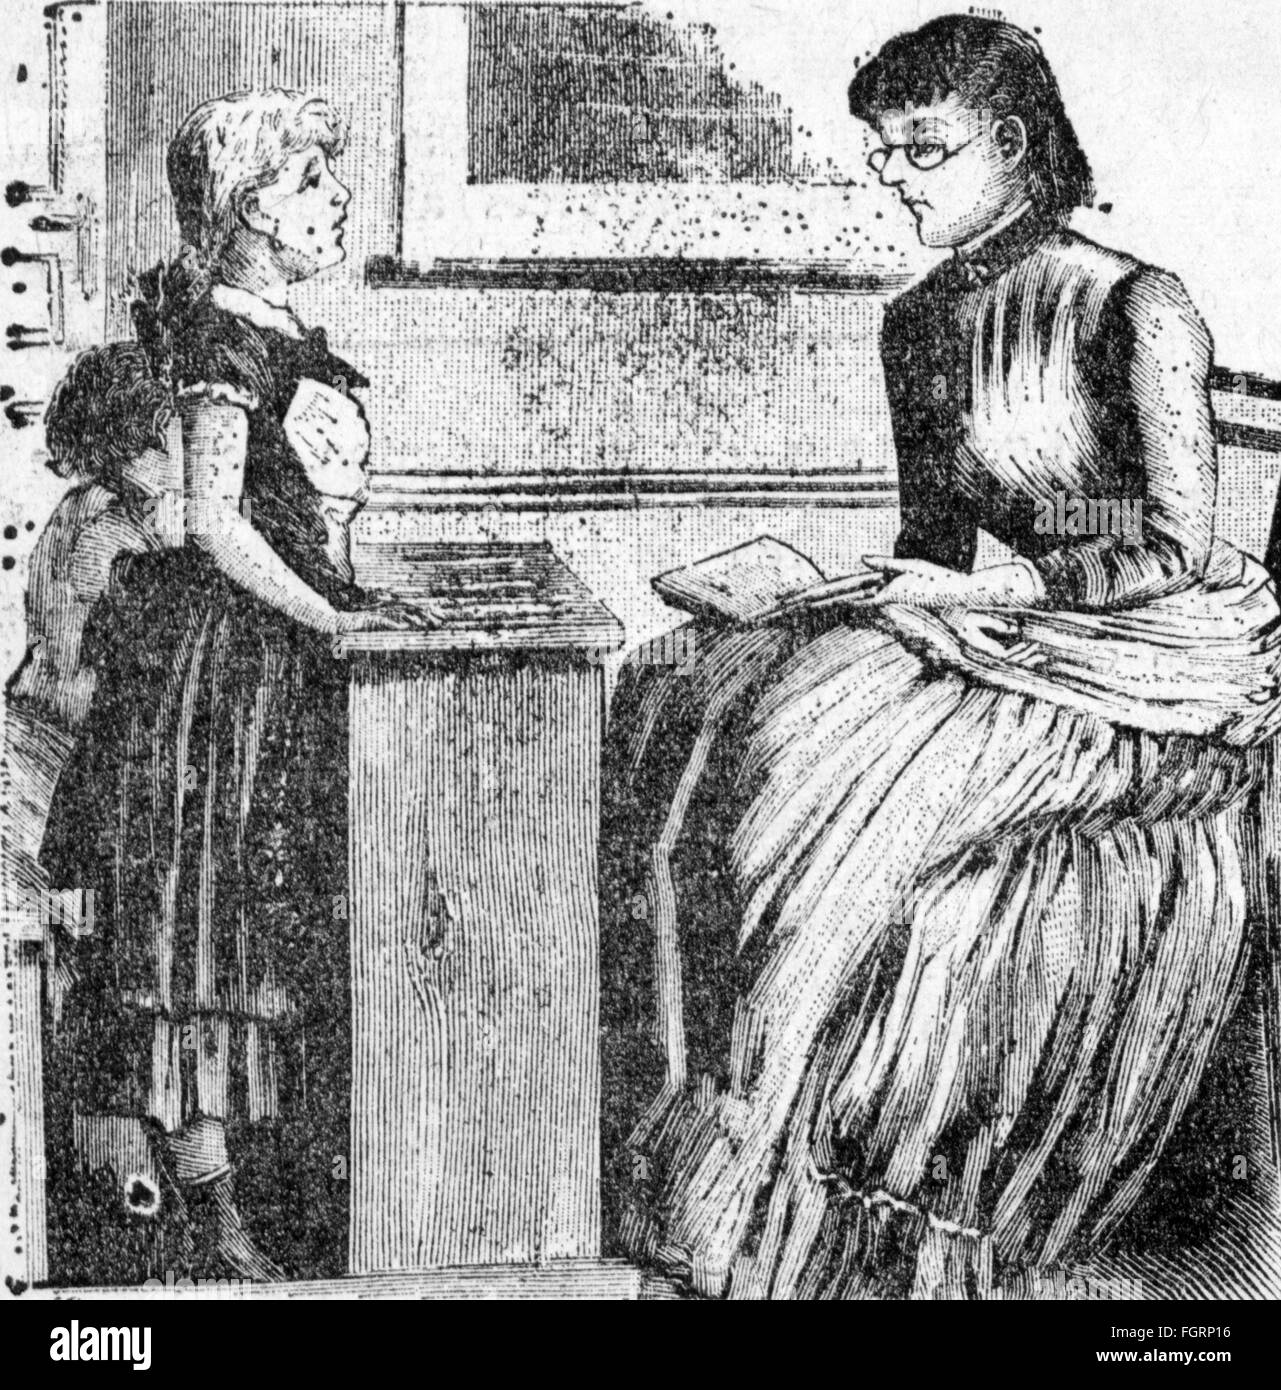 pedagogy,school / lessons / discipline,schoolgirl reciting poems learned learned by heart,wood engraving,19th century,19th century,graphic,graphics,classroom,class-room,classrooms,class-rooms,school lessons,schoolmistress,full length,standing,schoolgirl,schoolgirls,preservice teacher,pedagogue,pedagog,pedagogues,pedagogs,educator,teacher,educators,teachers,speak,speaking,by heart,by rote,from memory,retentive memory,tenacious memory,jog memory,pedagogy,paedagogy,education,school,schools,lessons,classes,bear,bearing,po,Additional-Rights-Clearences-Not Available Stock Photo